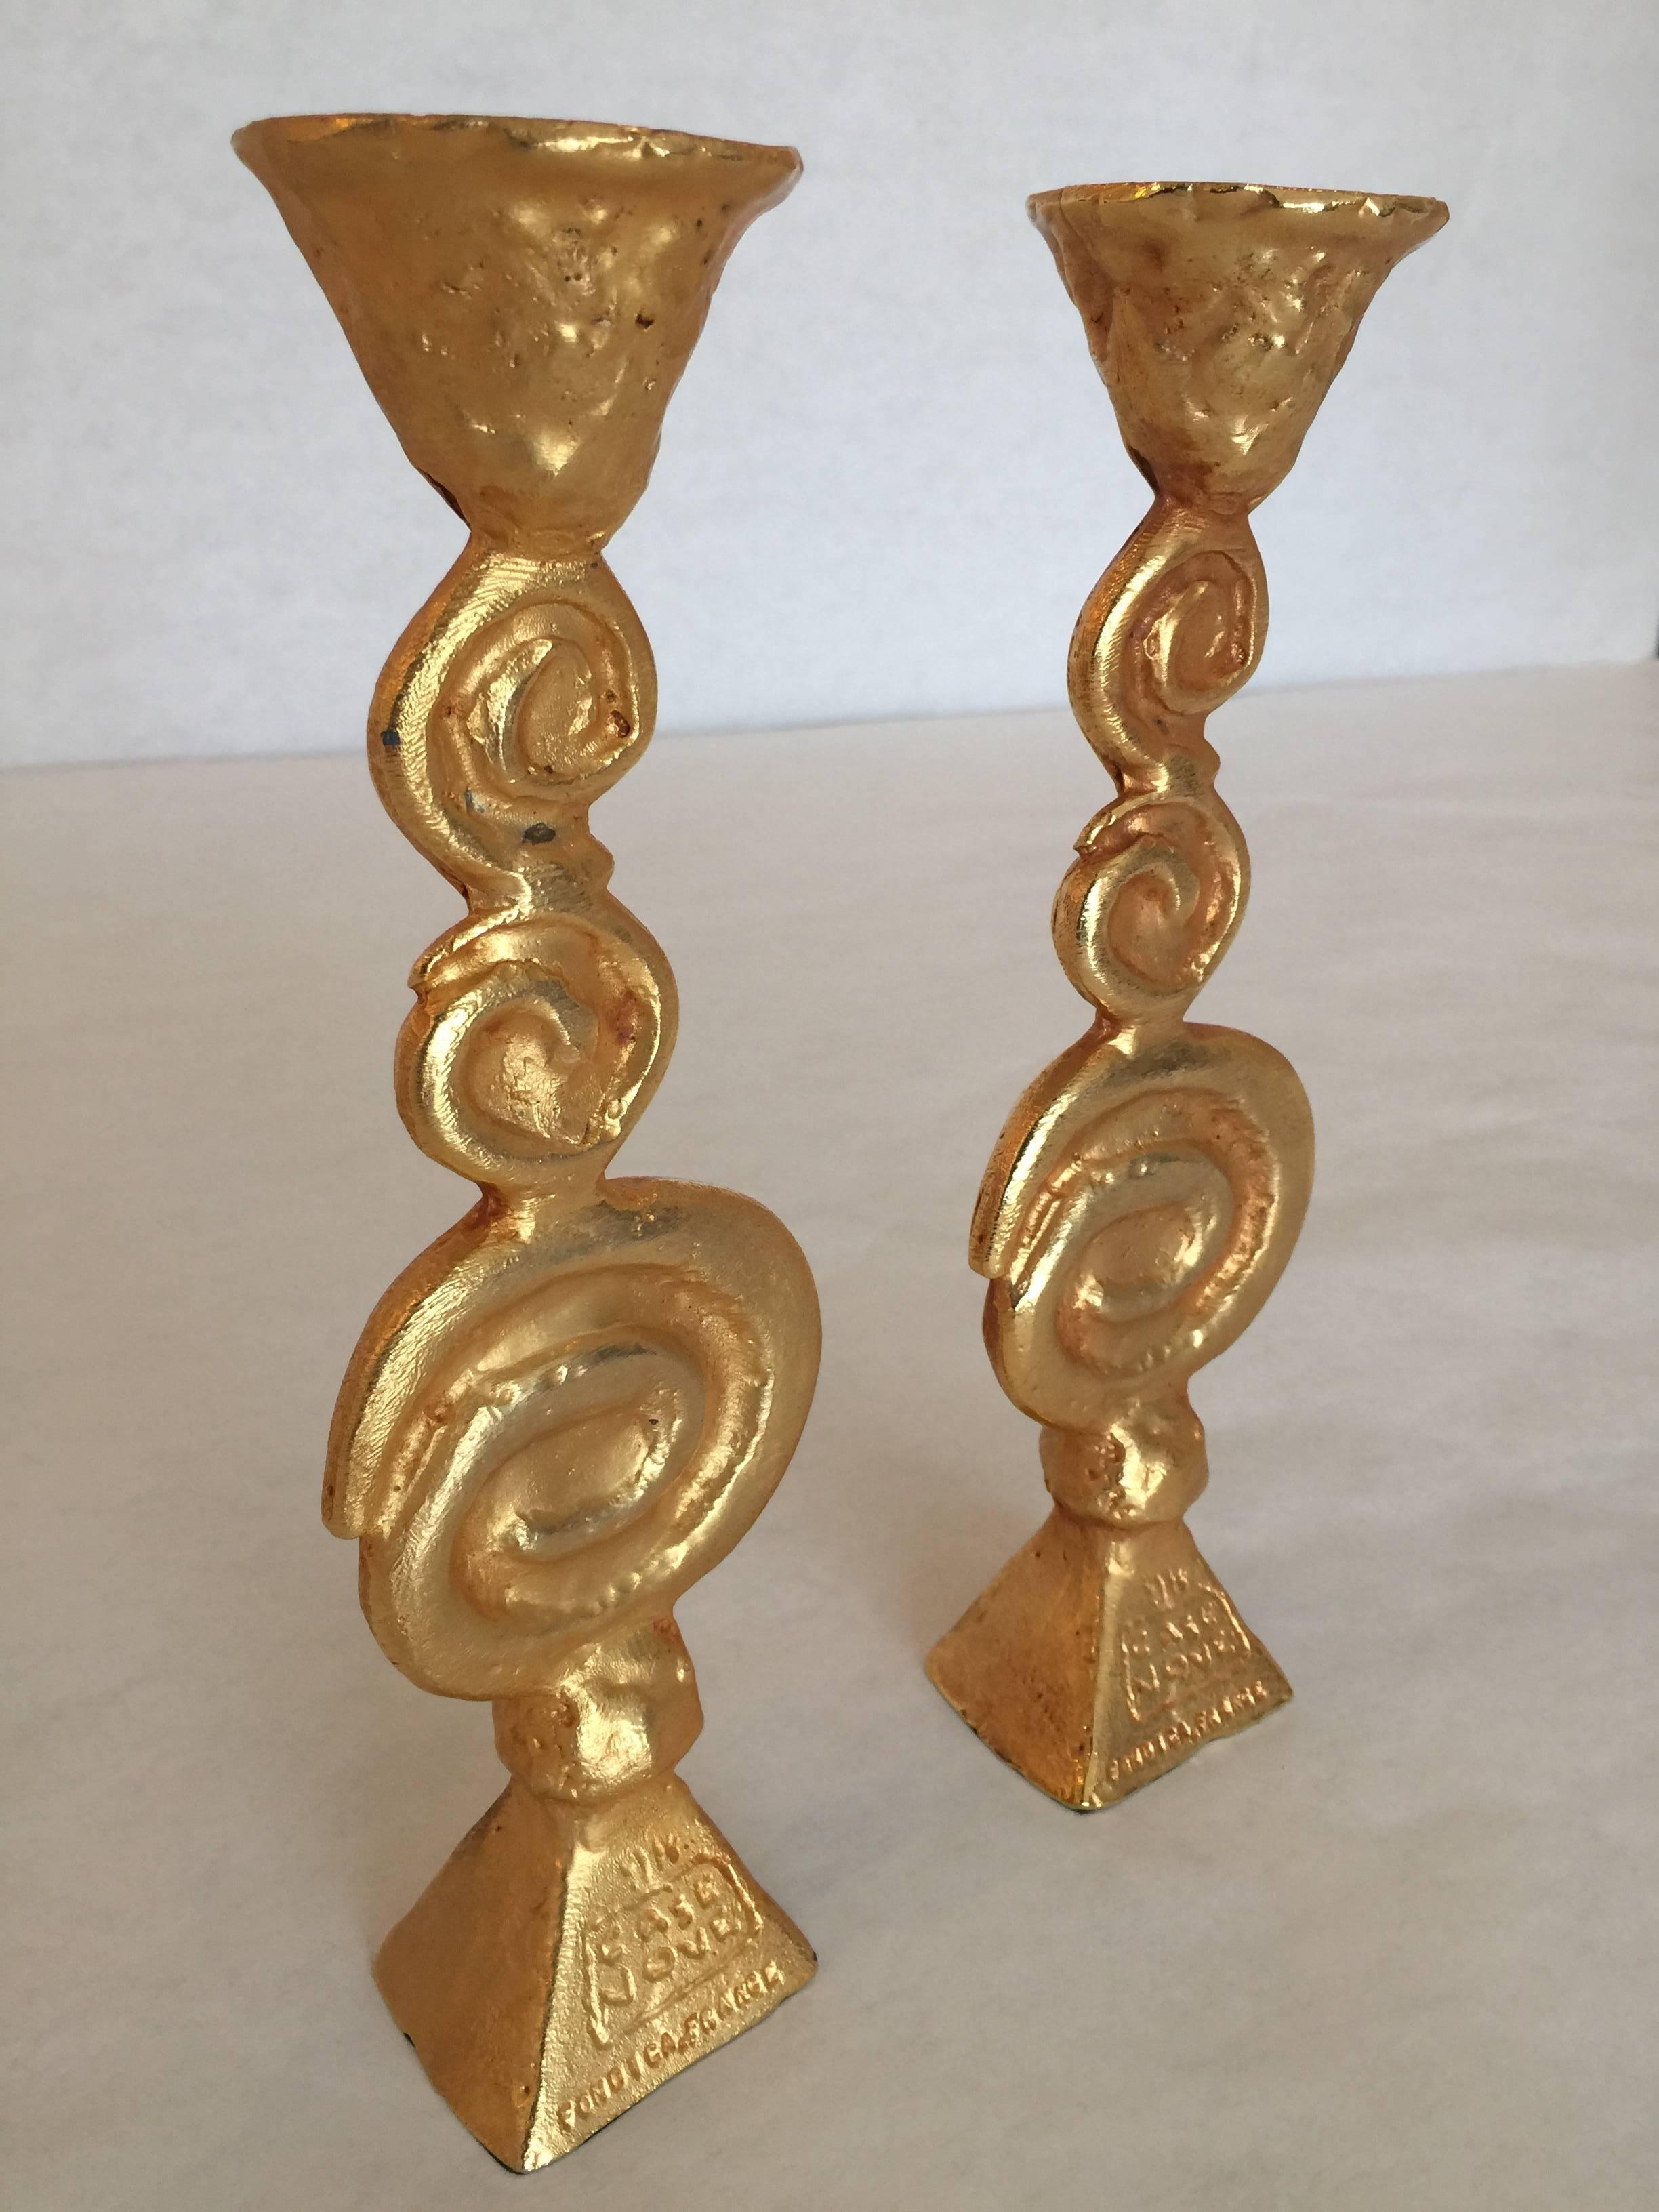 Extremely heavy gilt bronze, these French candlesticks are highly collectible. These are quite rare and signed.